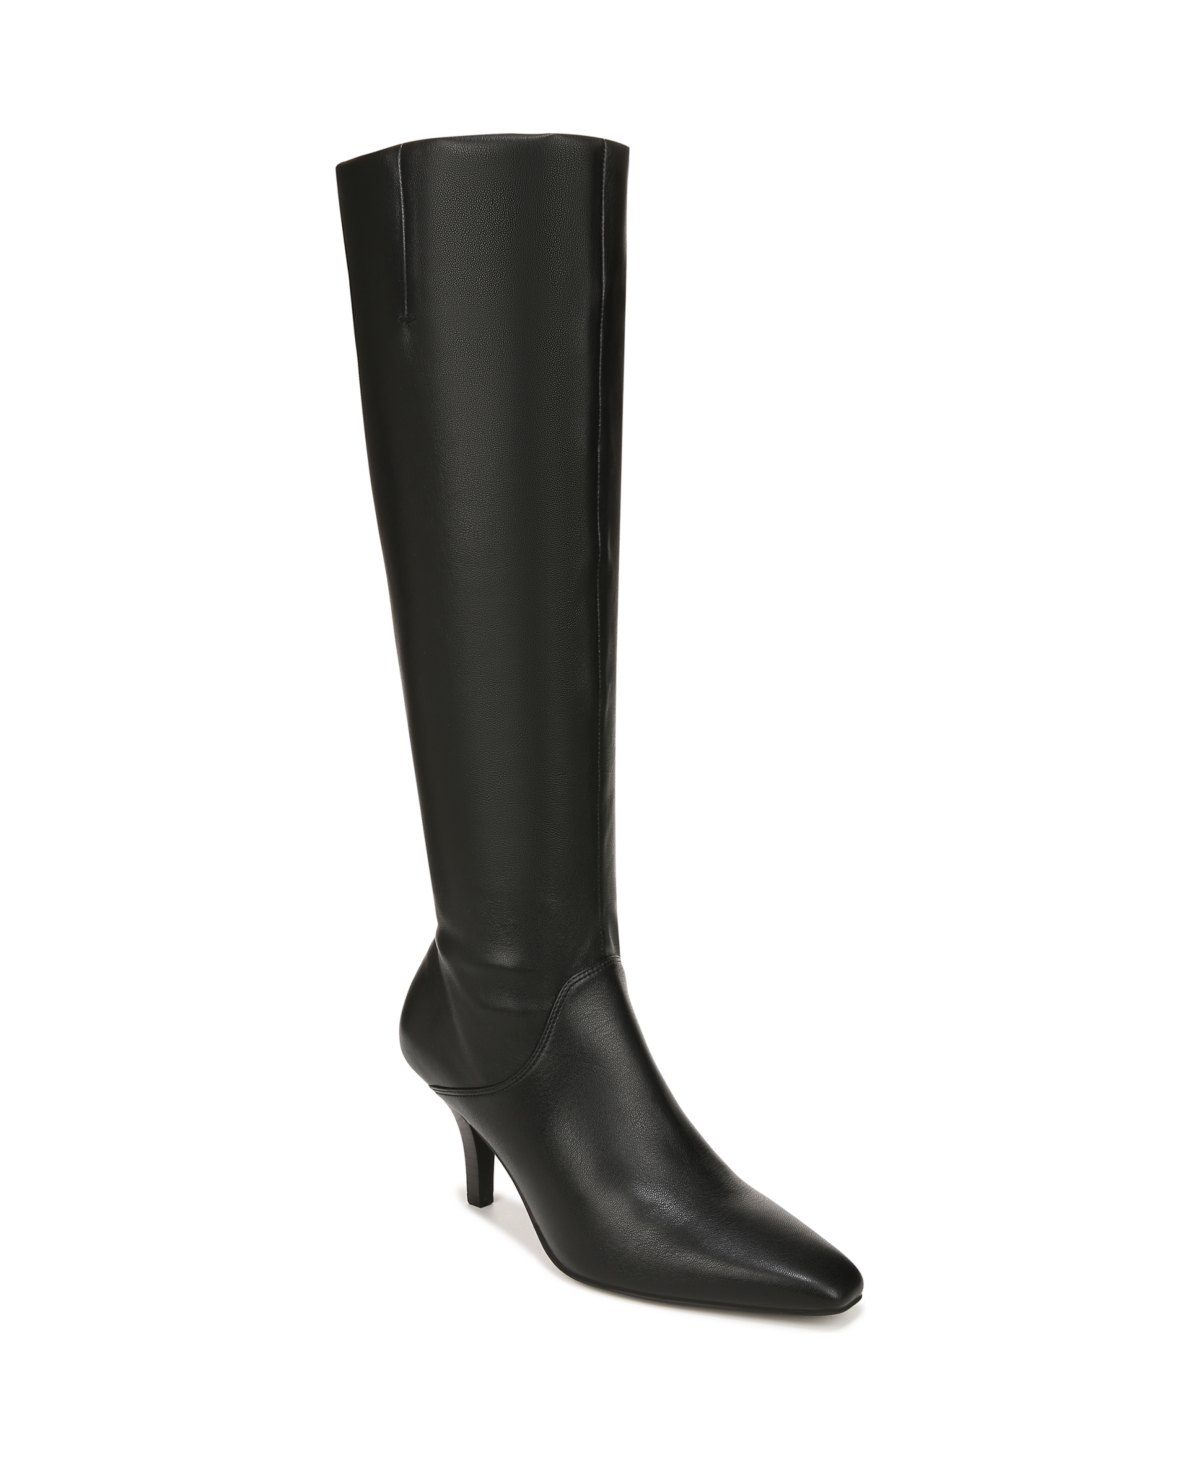 Lyla Wide Calf Knee High Boots - Black Faux Leather